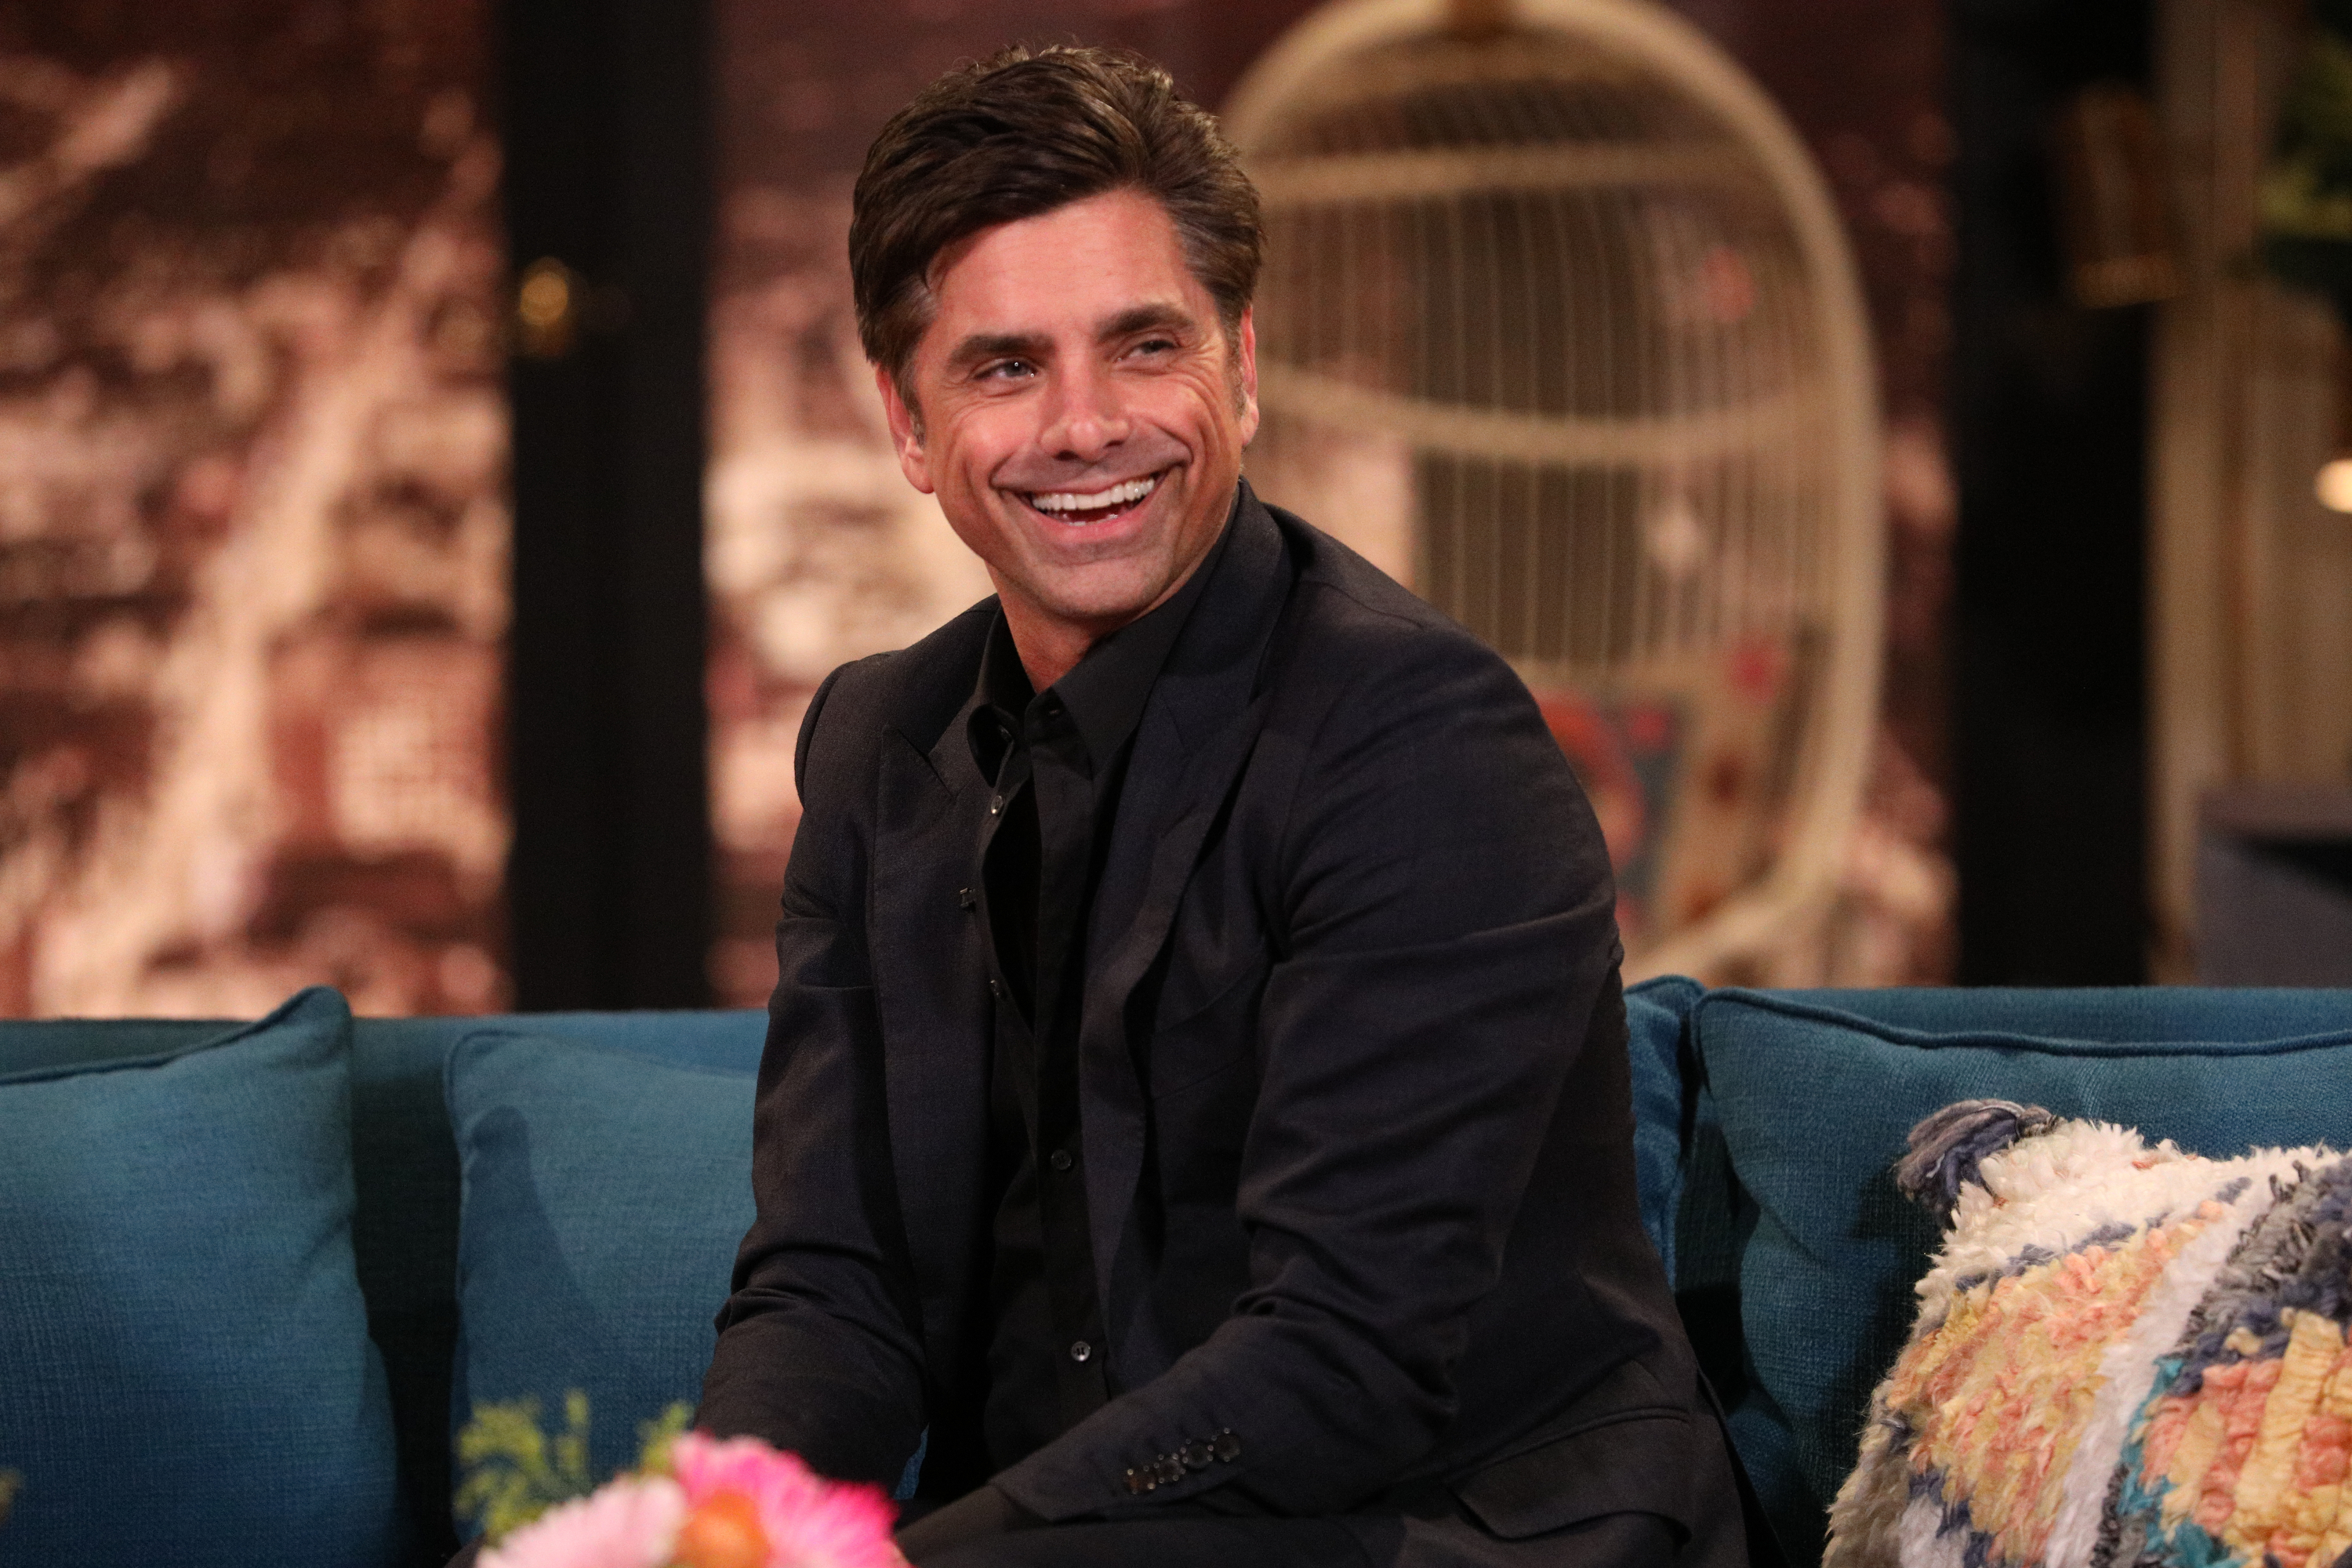 John Stamos on the set of "Busy Tonight" episode 106 | Source: Getty Images